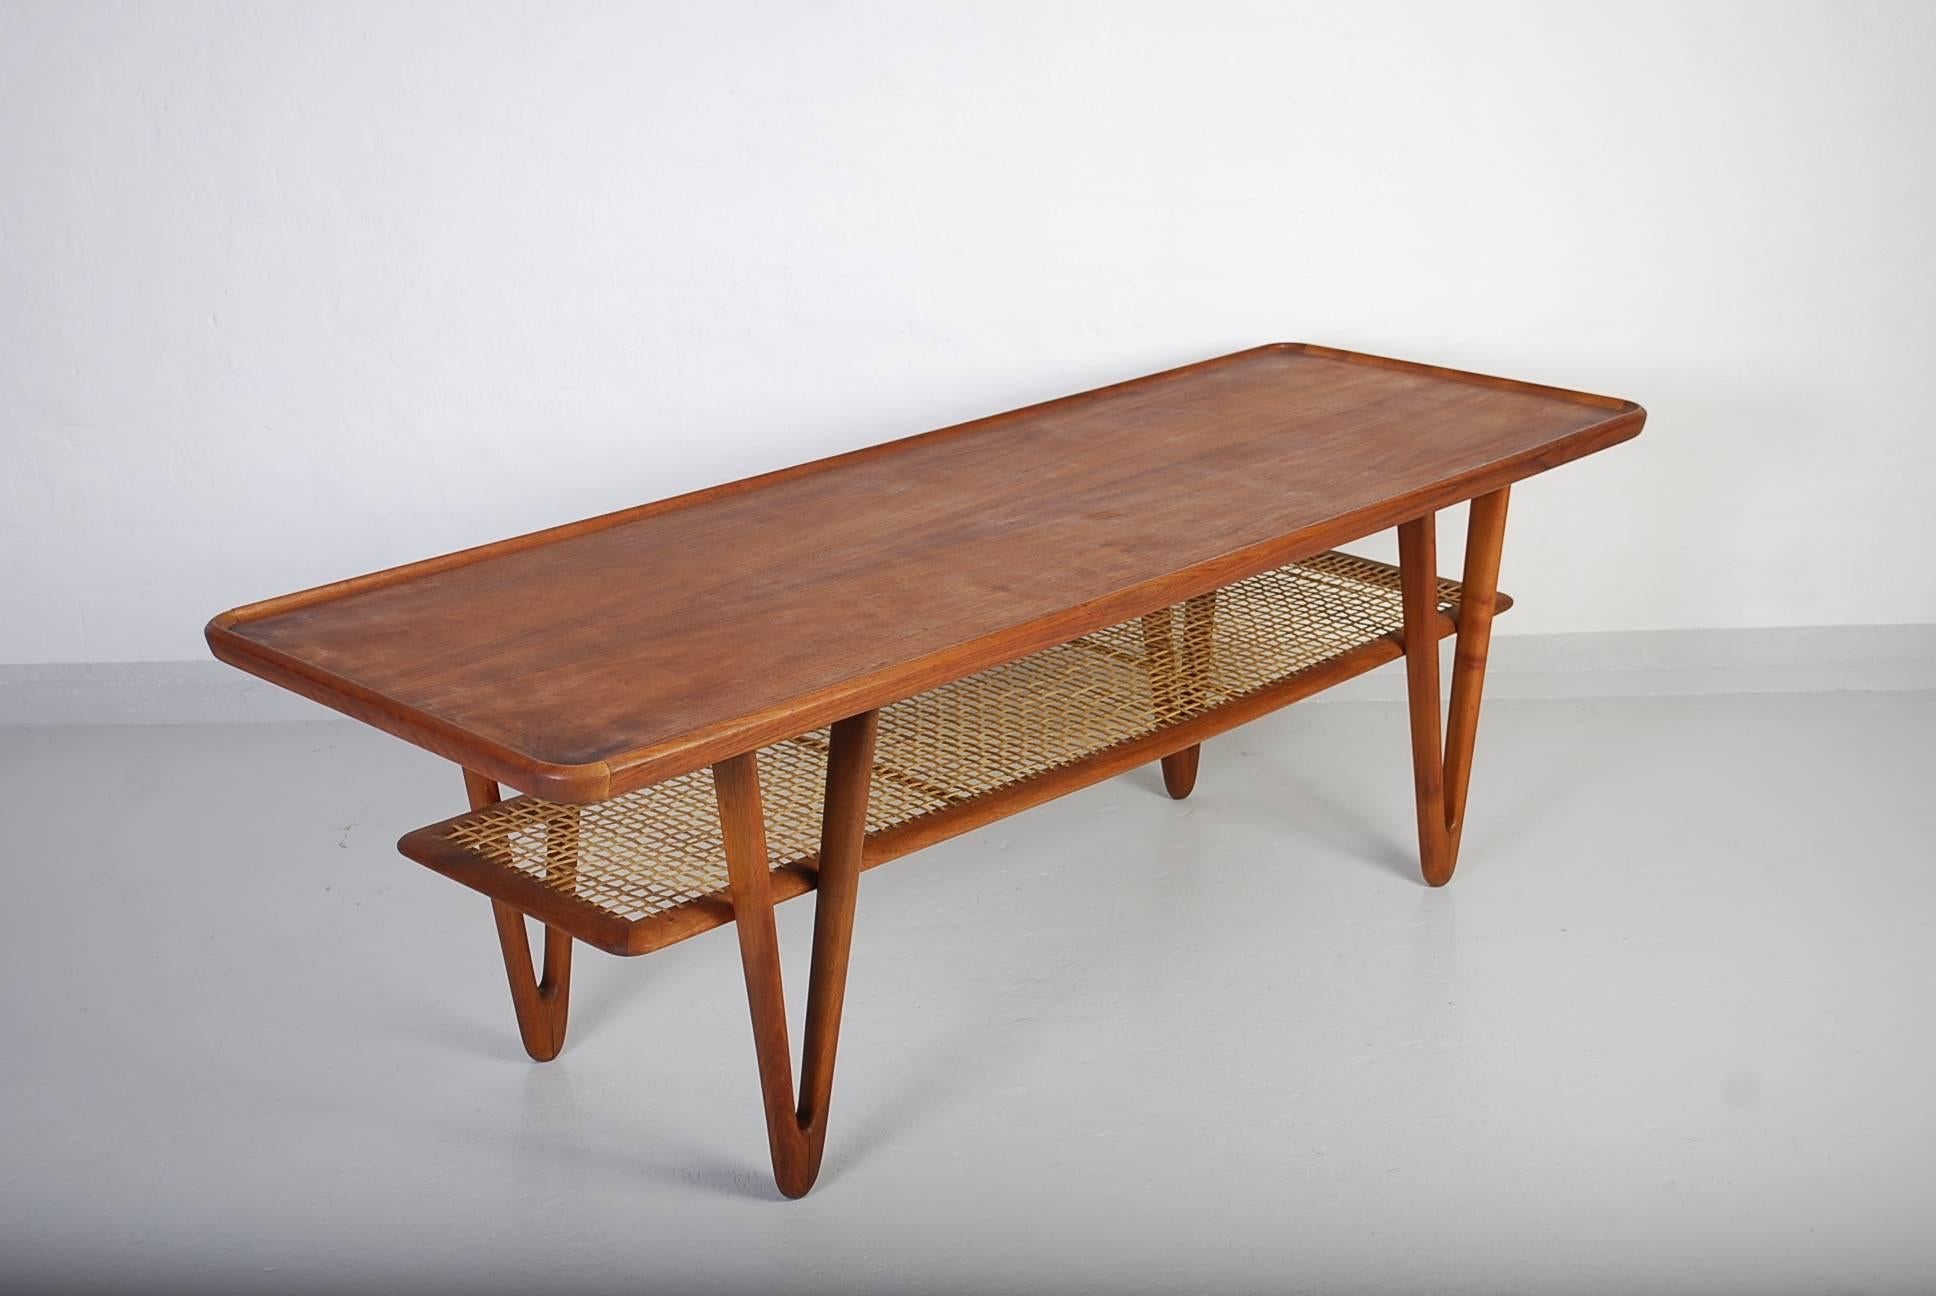 Midcentury solid teak coffee table by Danish designer Kurt Østervig. The coffee table has V-shaped legs and a cane shelf. The table is in very good vintage condition with minor signs of usage consistent with age and use.

This item will be available